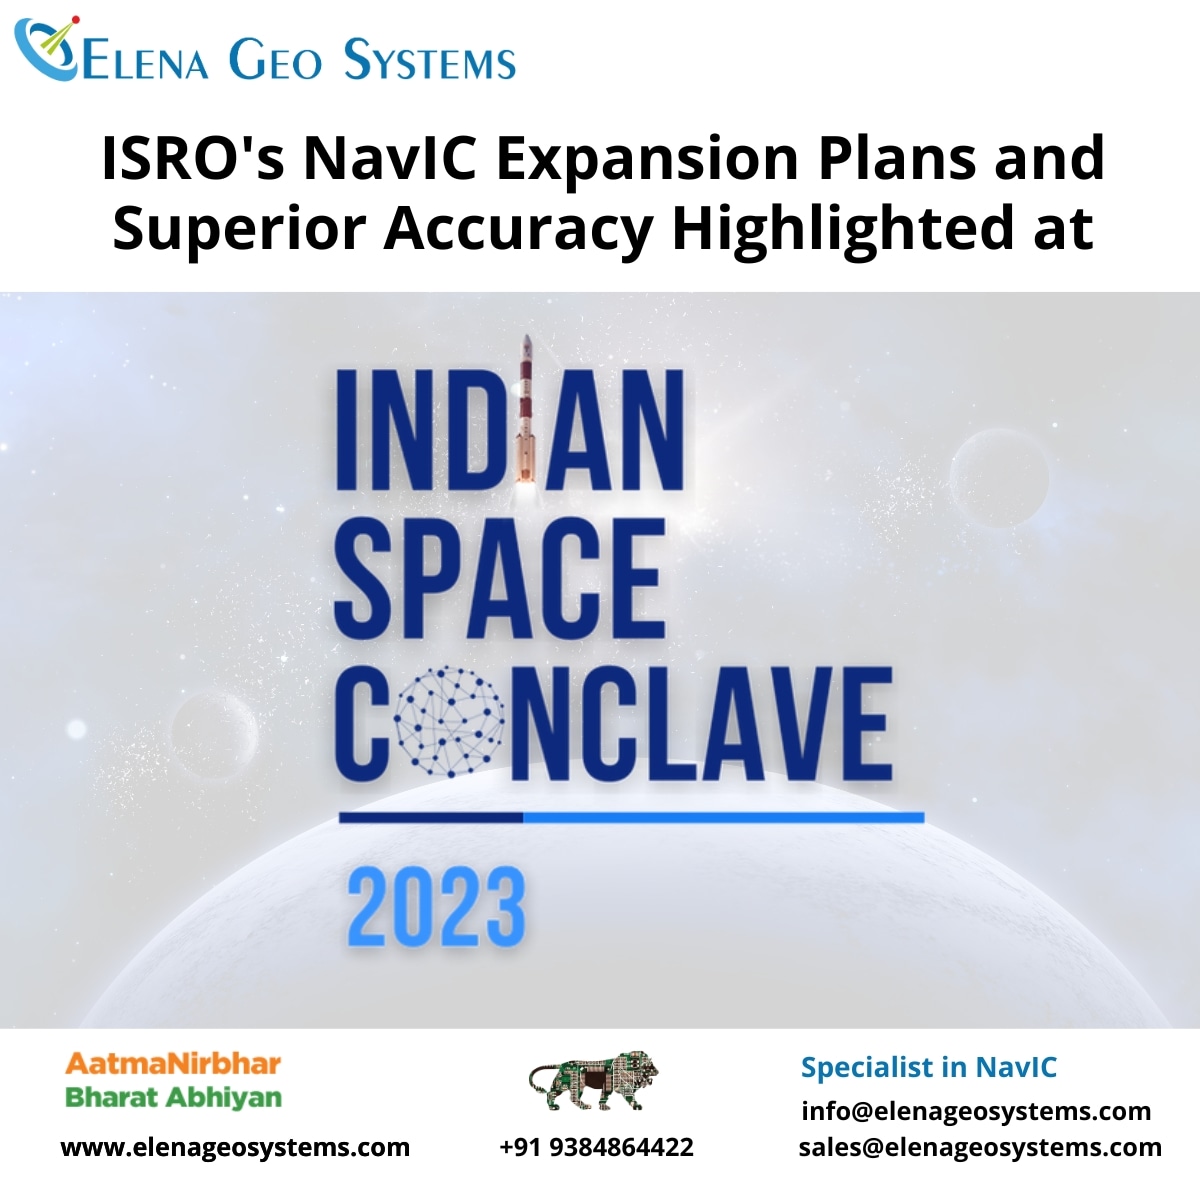 At Indian Space Conclave 2023, experts discussed space-enabled logistics and mobility. NavIC's advanced technology covers Africa-Australia, offering seamless operations and optimized routes. GPS needs additional satellites, while NavIC excels. #SatelliteTech #Innovation